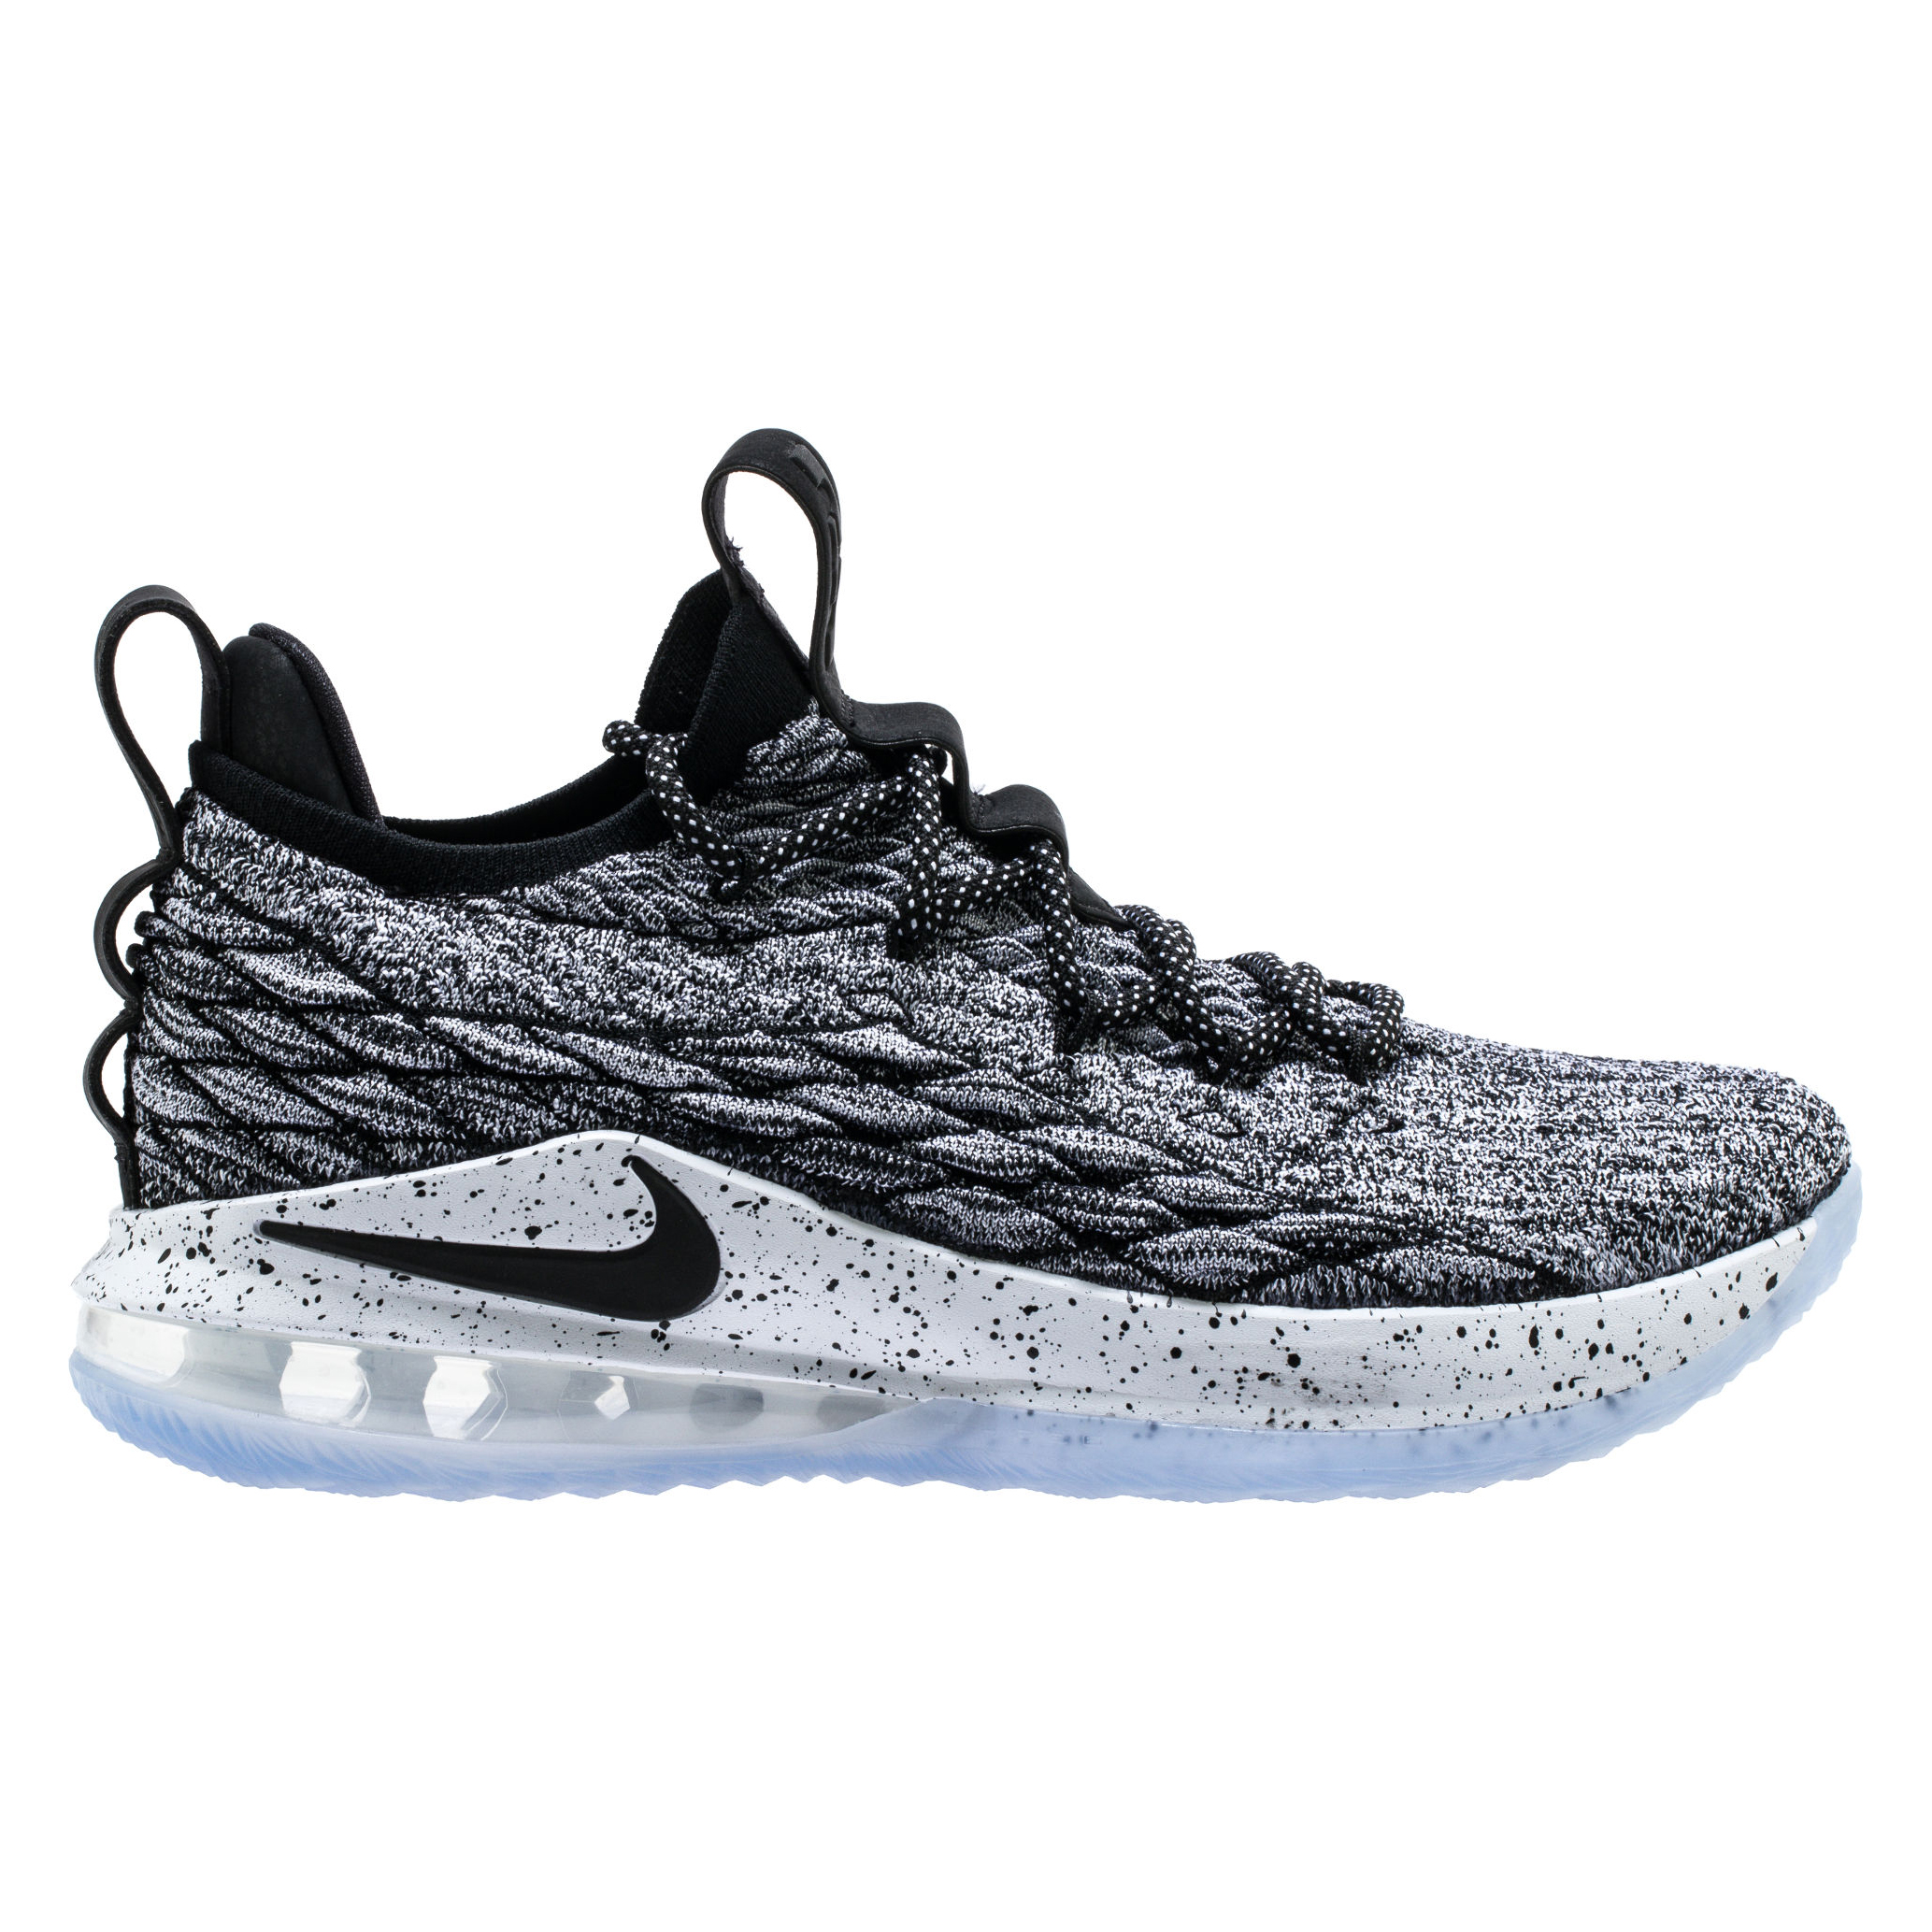 Two Nike LeBron 15 Low Colorways Will 